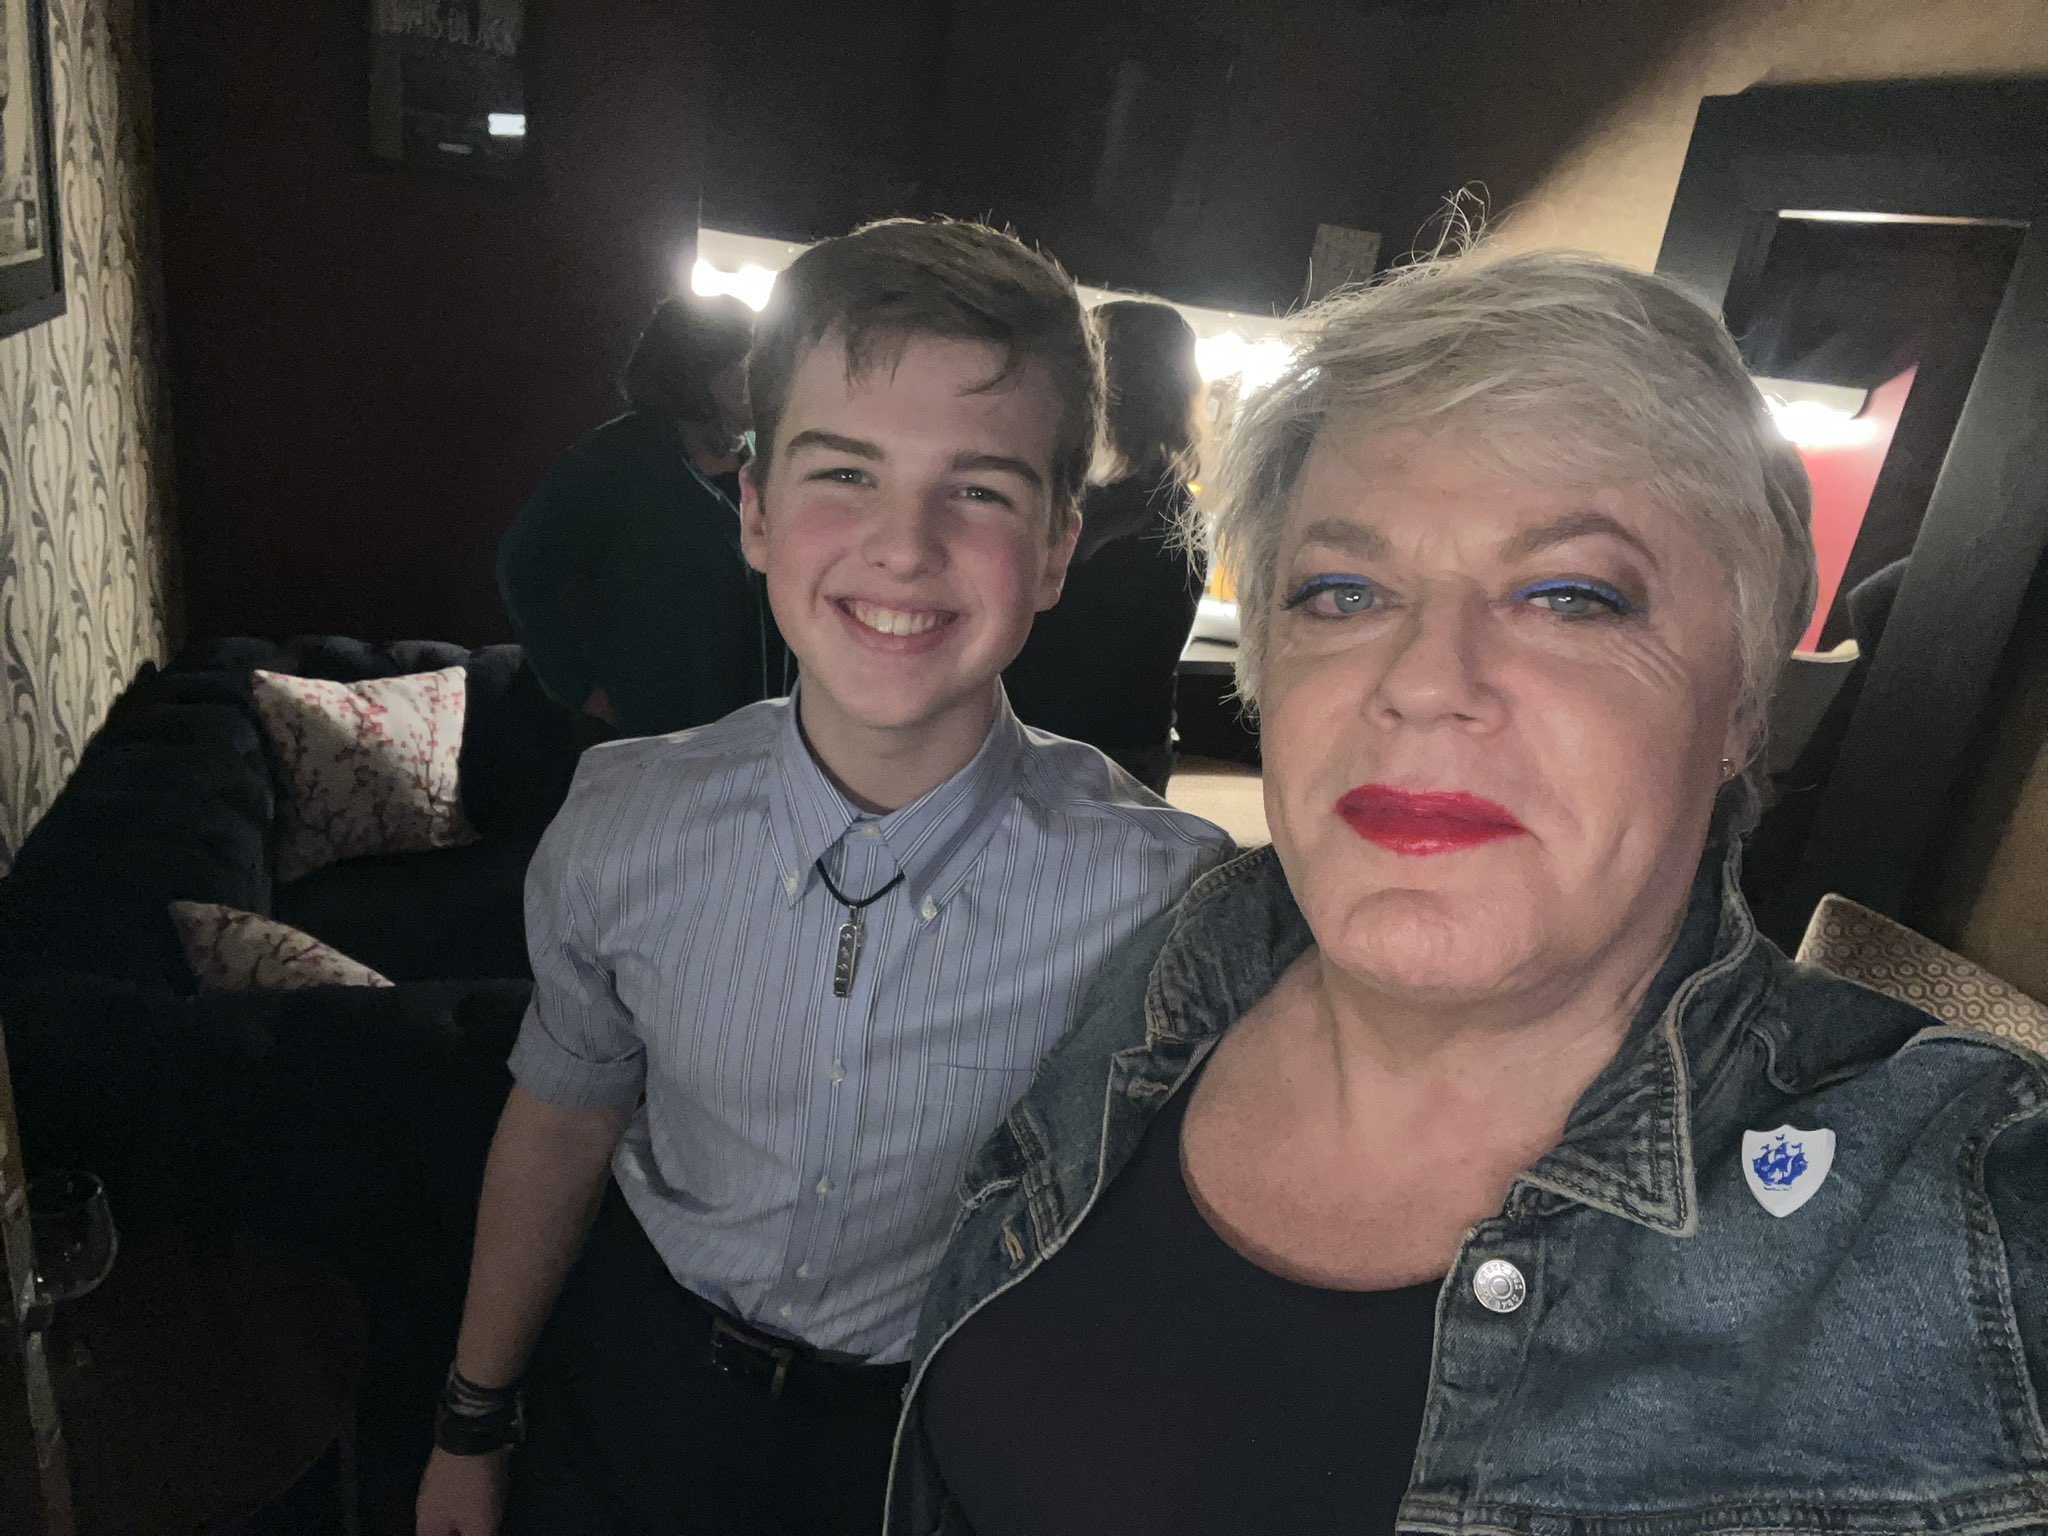 Iain Armitage - We heard from #LILT!!!! Yay!!!!! #LittleIainLovesTheatre  has been having a terrific time! Thank you, Miss Tara, for looking after  him! He got to see Les Misérables Broadway and also